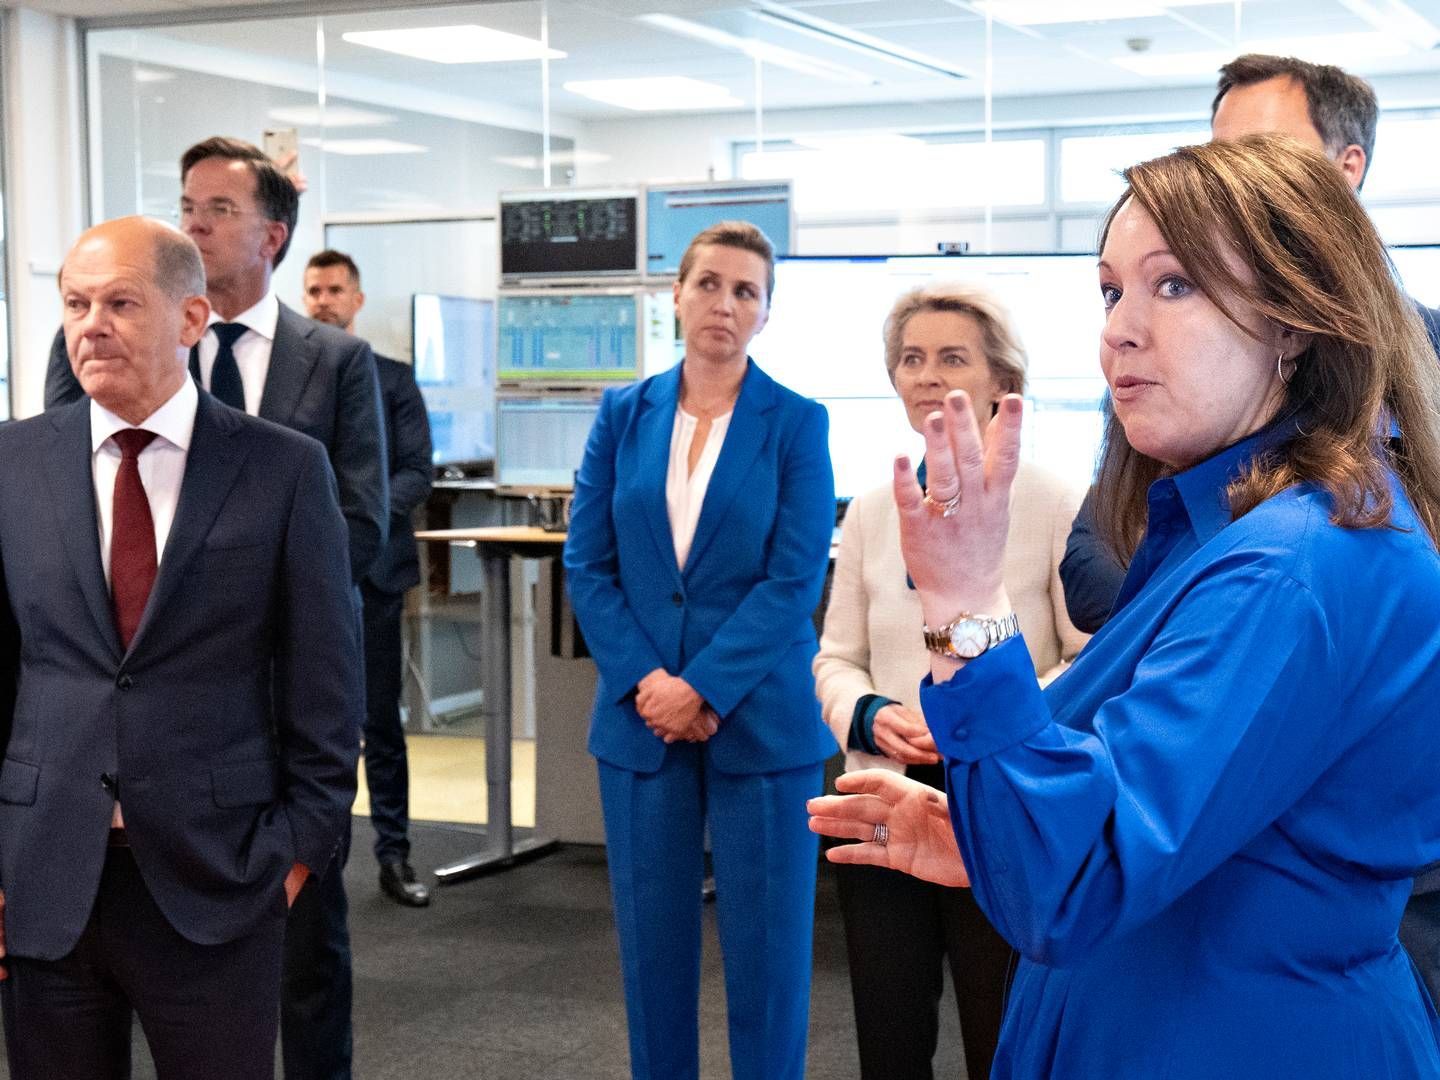 European offshore wind is still "crucial" to Vattenfall, says CEO Anna Borg, pictured here giving politicians a tour of the firm's facility in Esbjerg. | Photo: Vattenfall